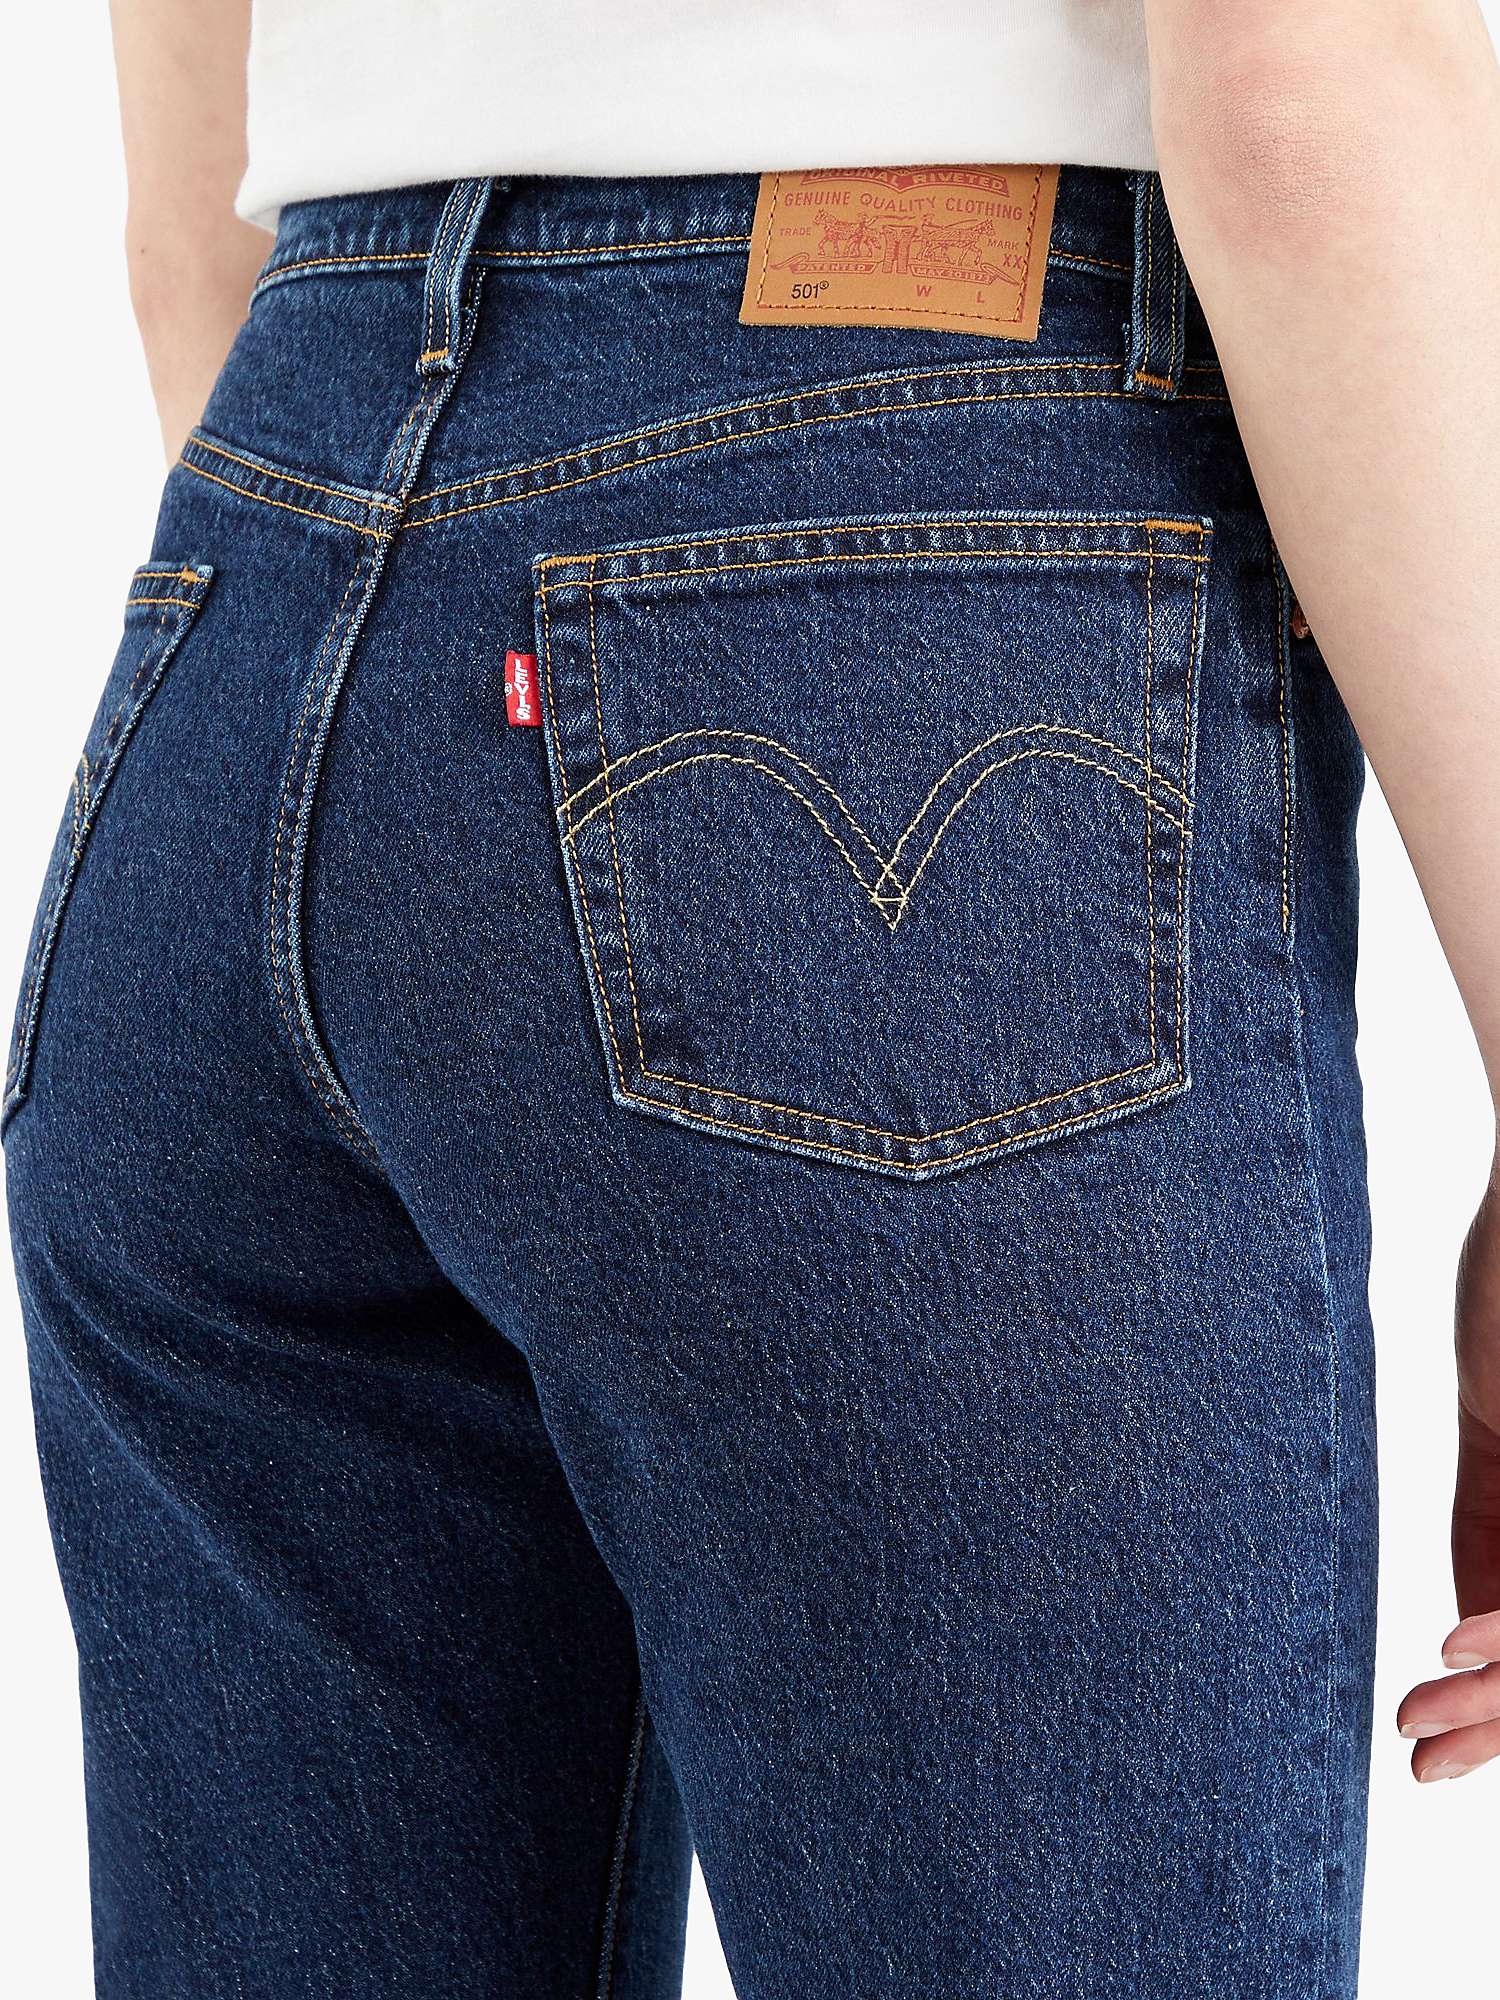 Buy Levi's 501 Cropped Jeans Online at johnlewis.com